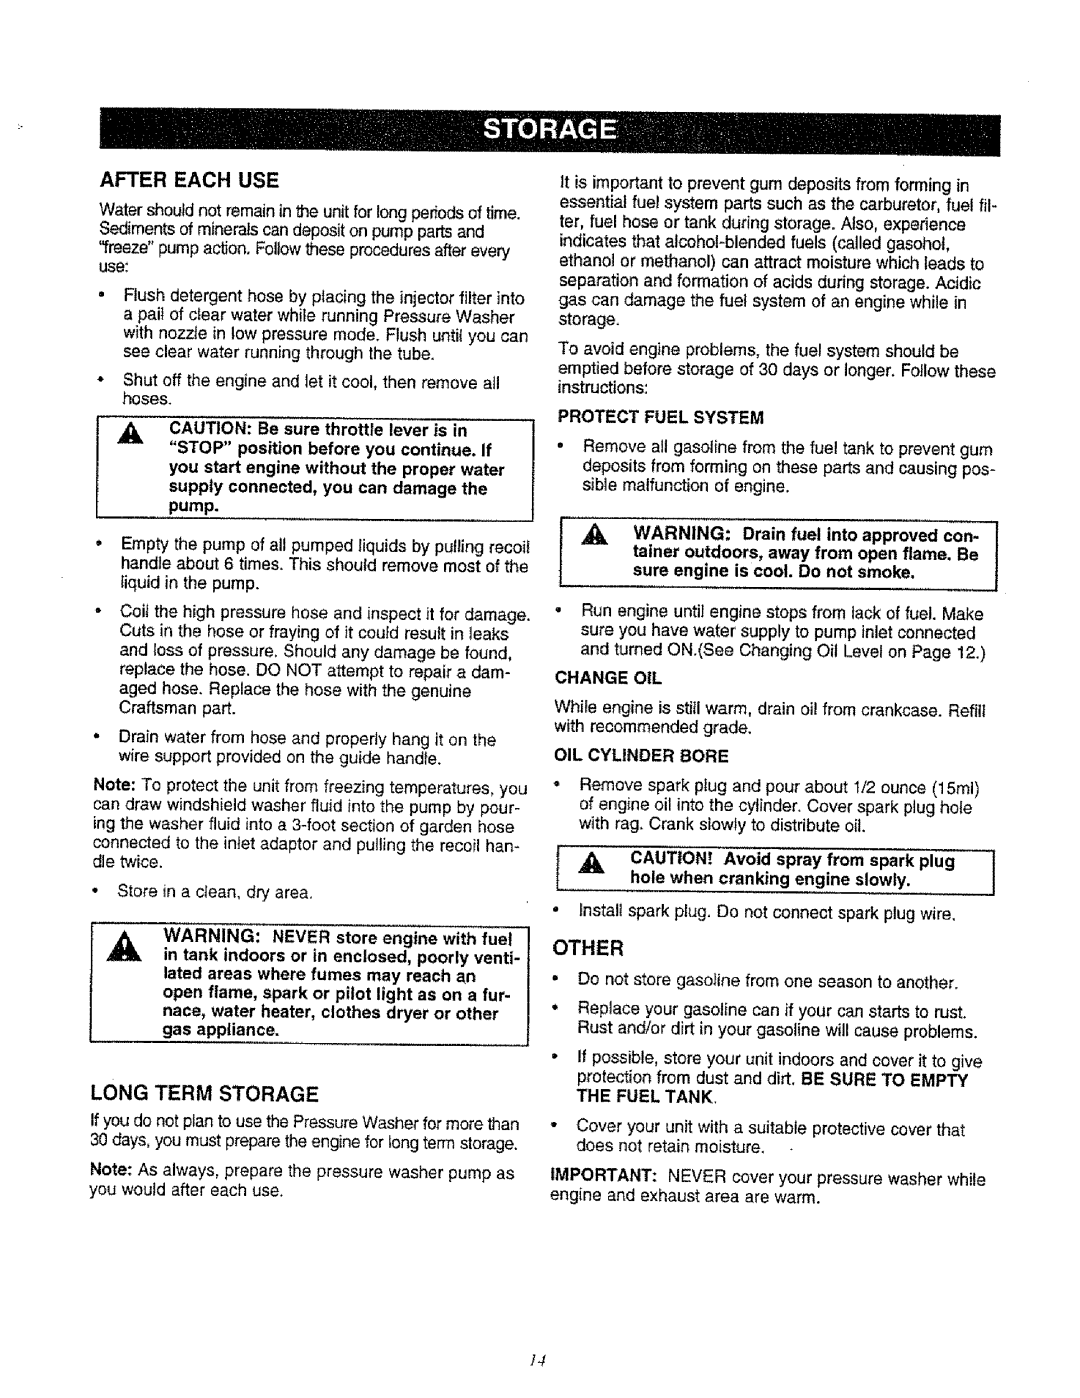 Sears 580.761652 manual After Each Use, Long Term Storage, Other, nace, water heater, clothes dryer or other, gas appliance 